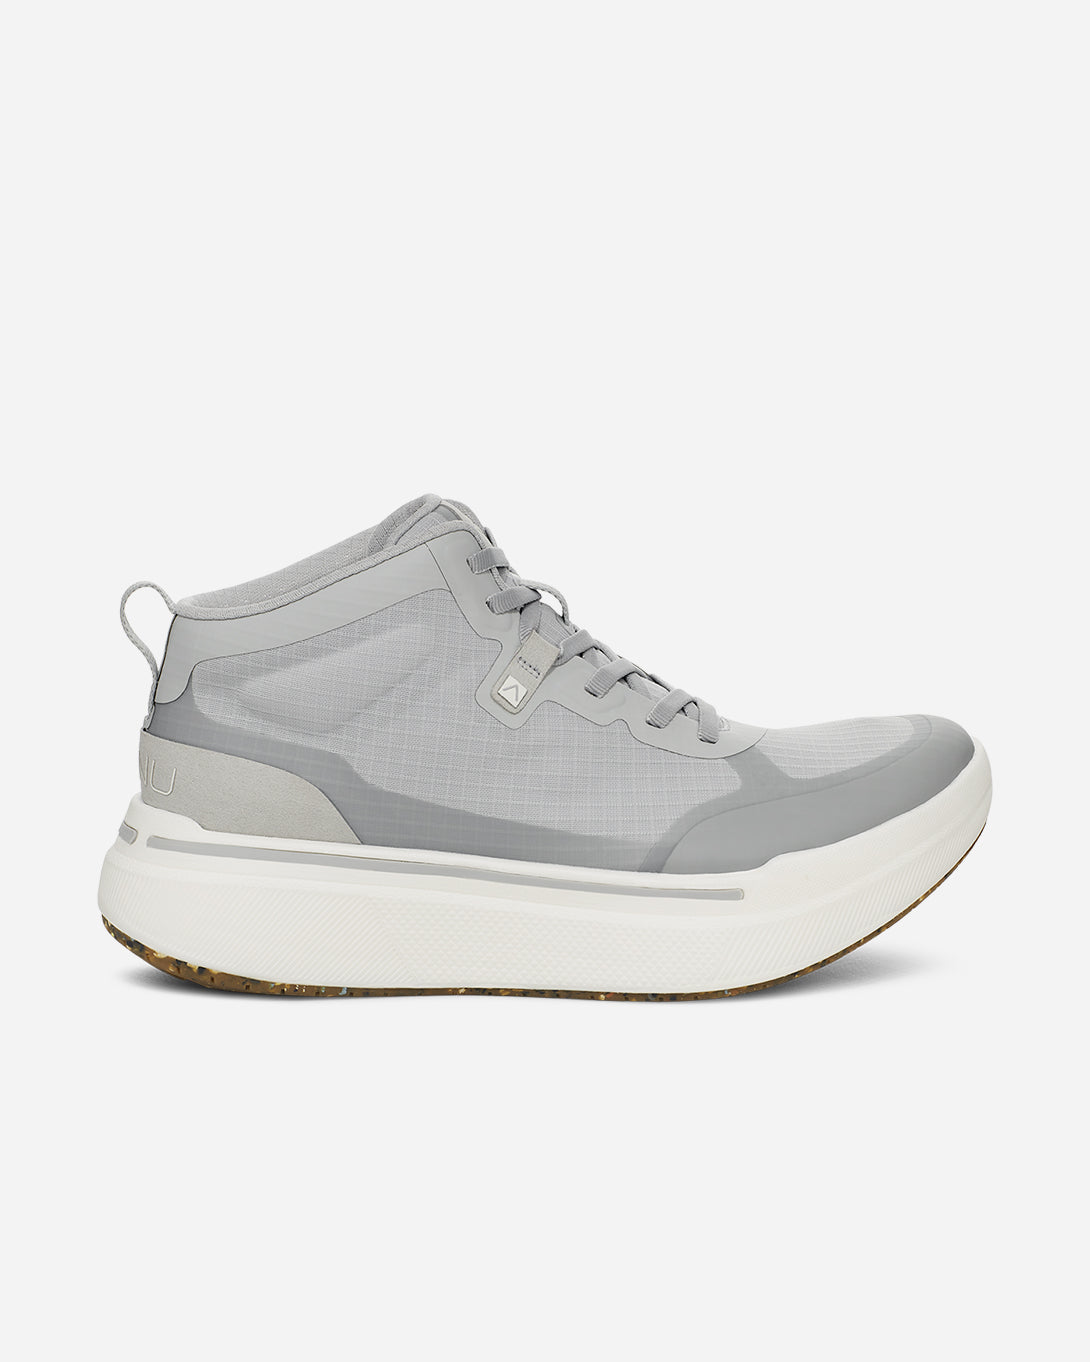 Harbor Mist/White Sequence 1 Mid Ahnu Shoes Mid Height